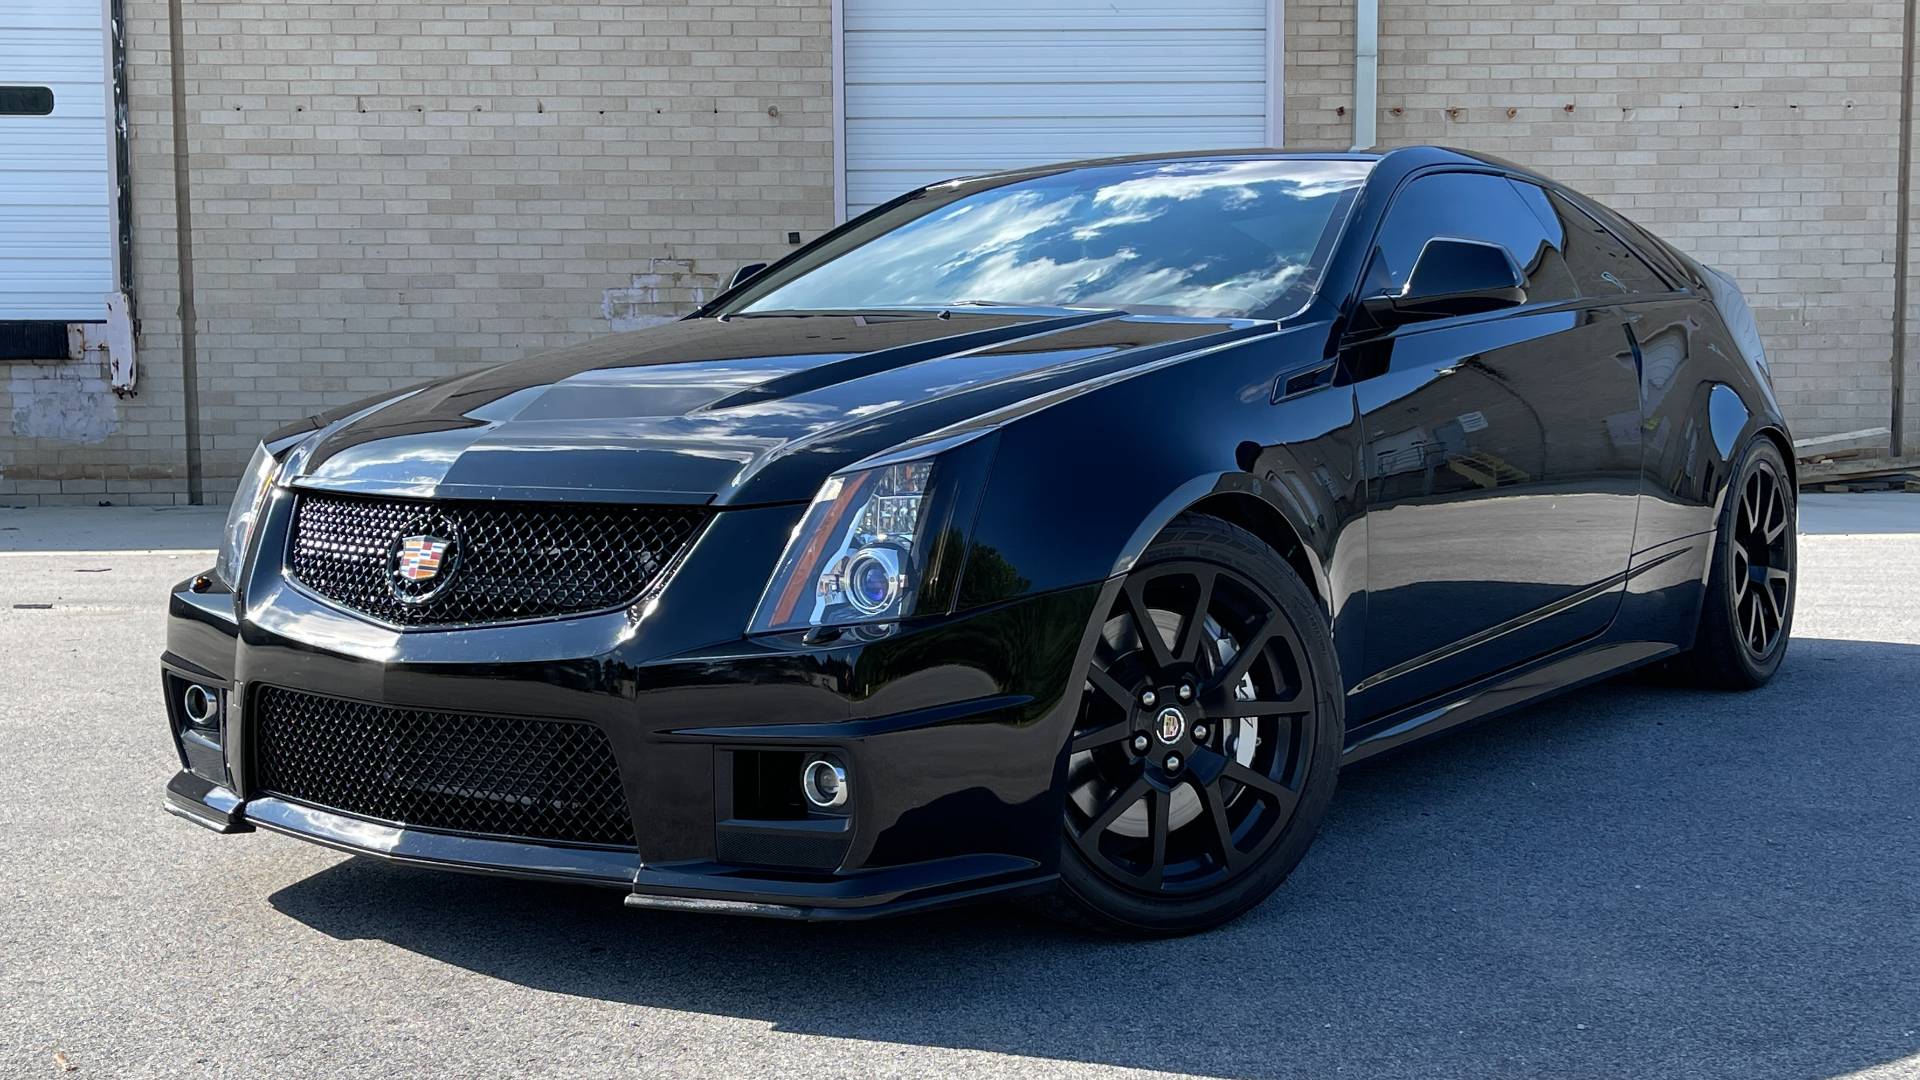 Used 2011 Cadillac CTS-V COUPE 6.2L 600HP+ / NAV / BOSE / SUNROOF / RECARO / 19IN WHLS / REARVIEW for sale Sold at Formula Imports in Charlotte NC 28227 2